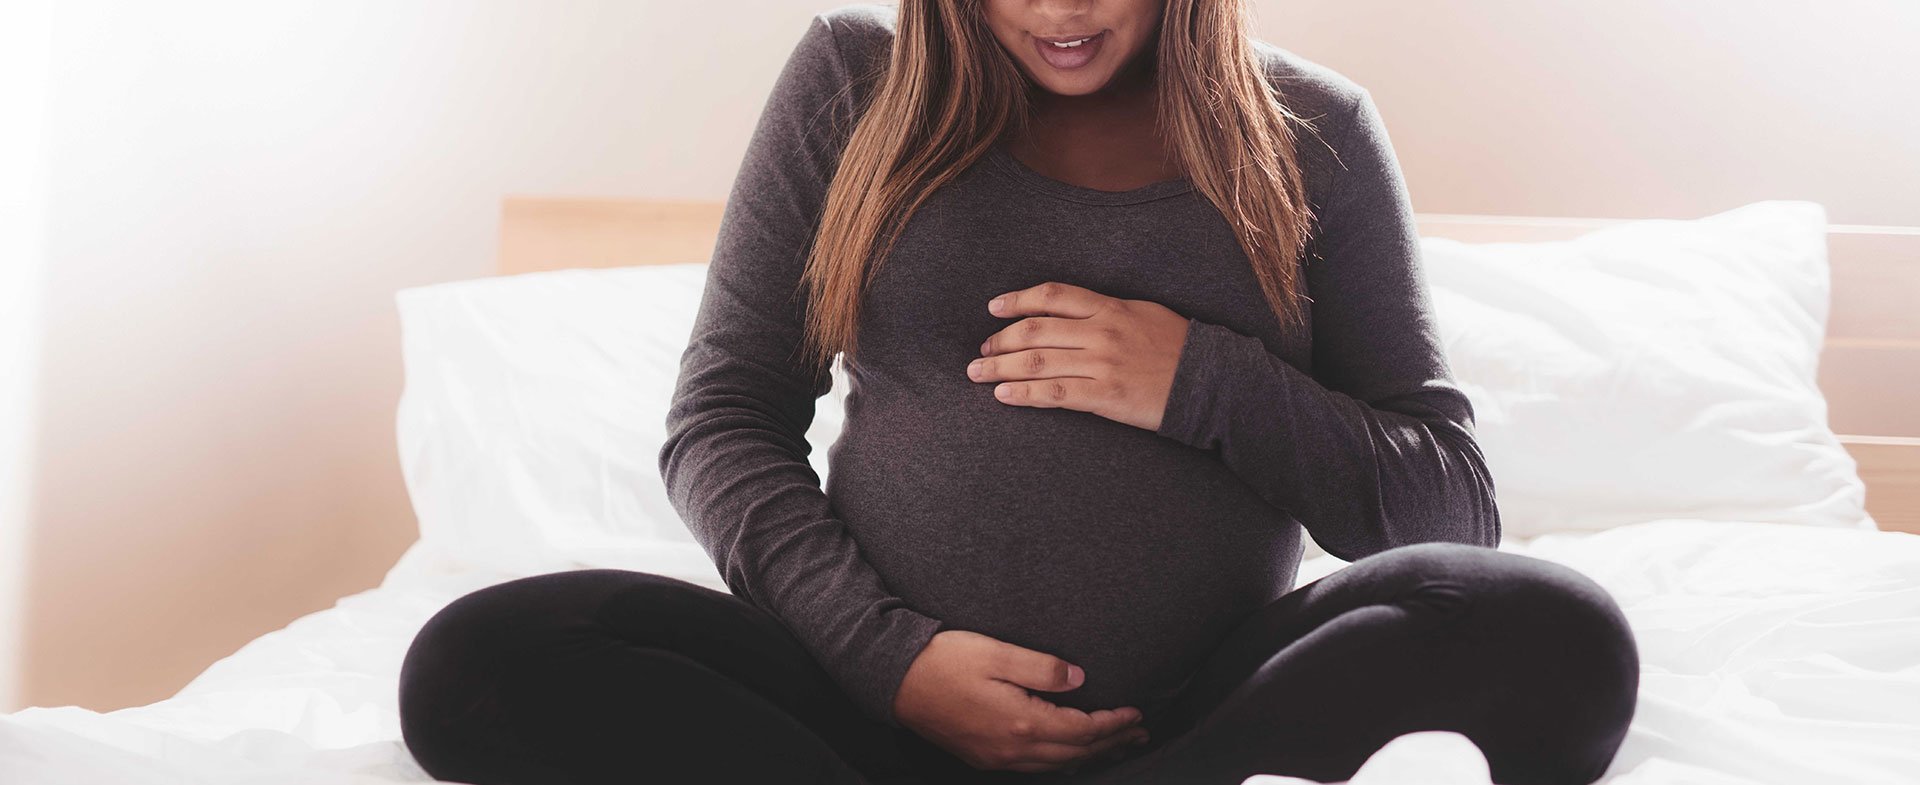 pregnancy problems and heart risk